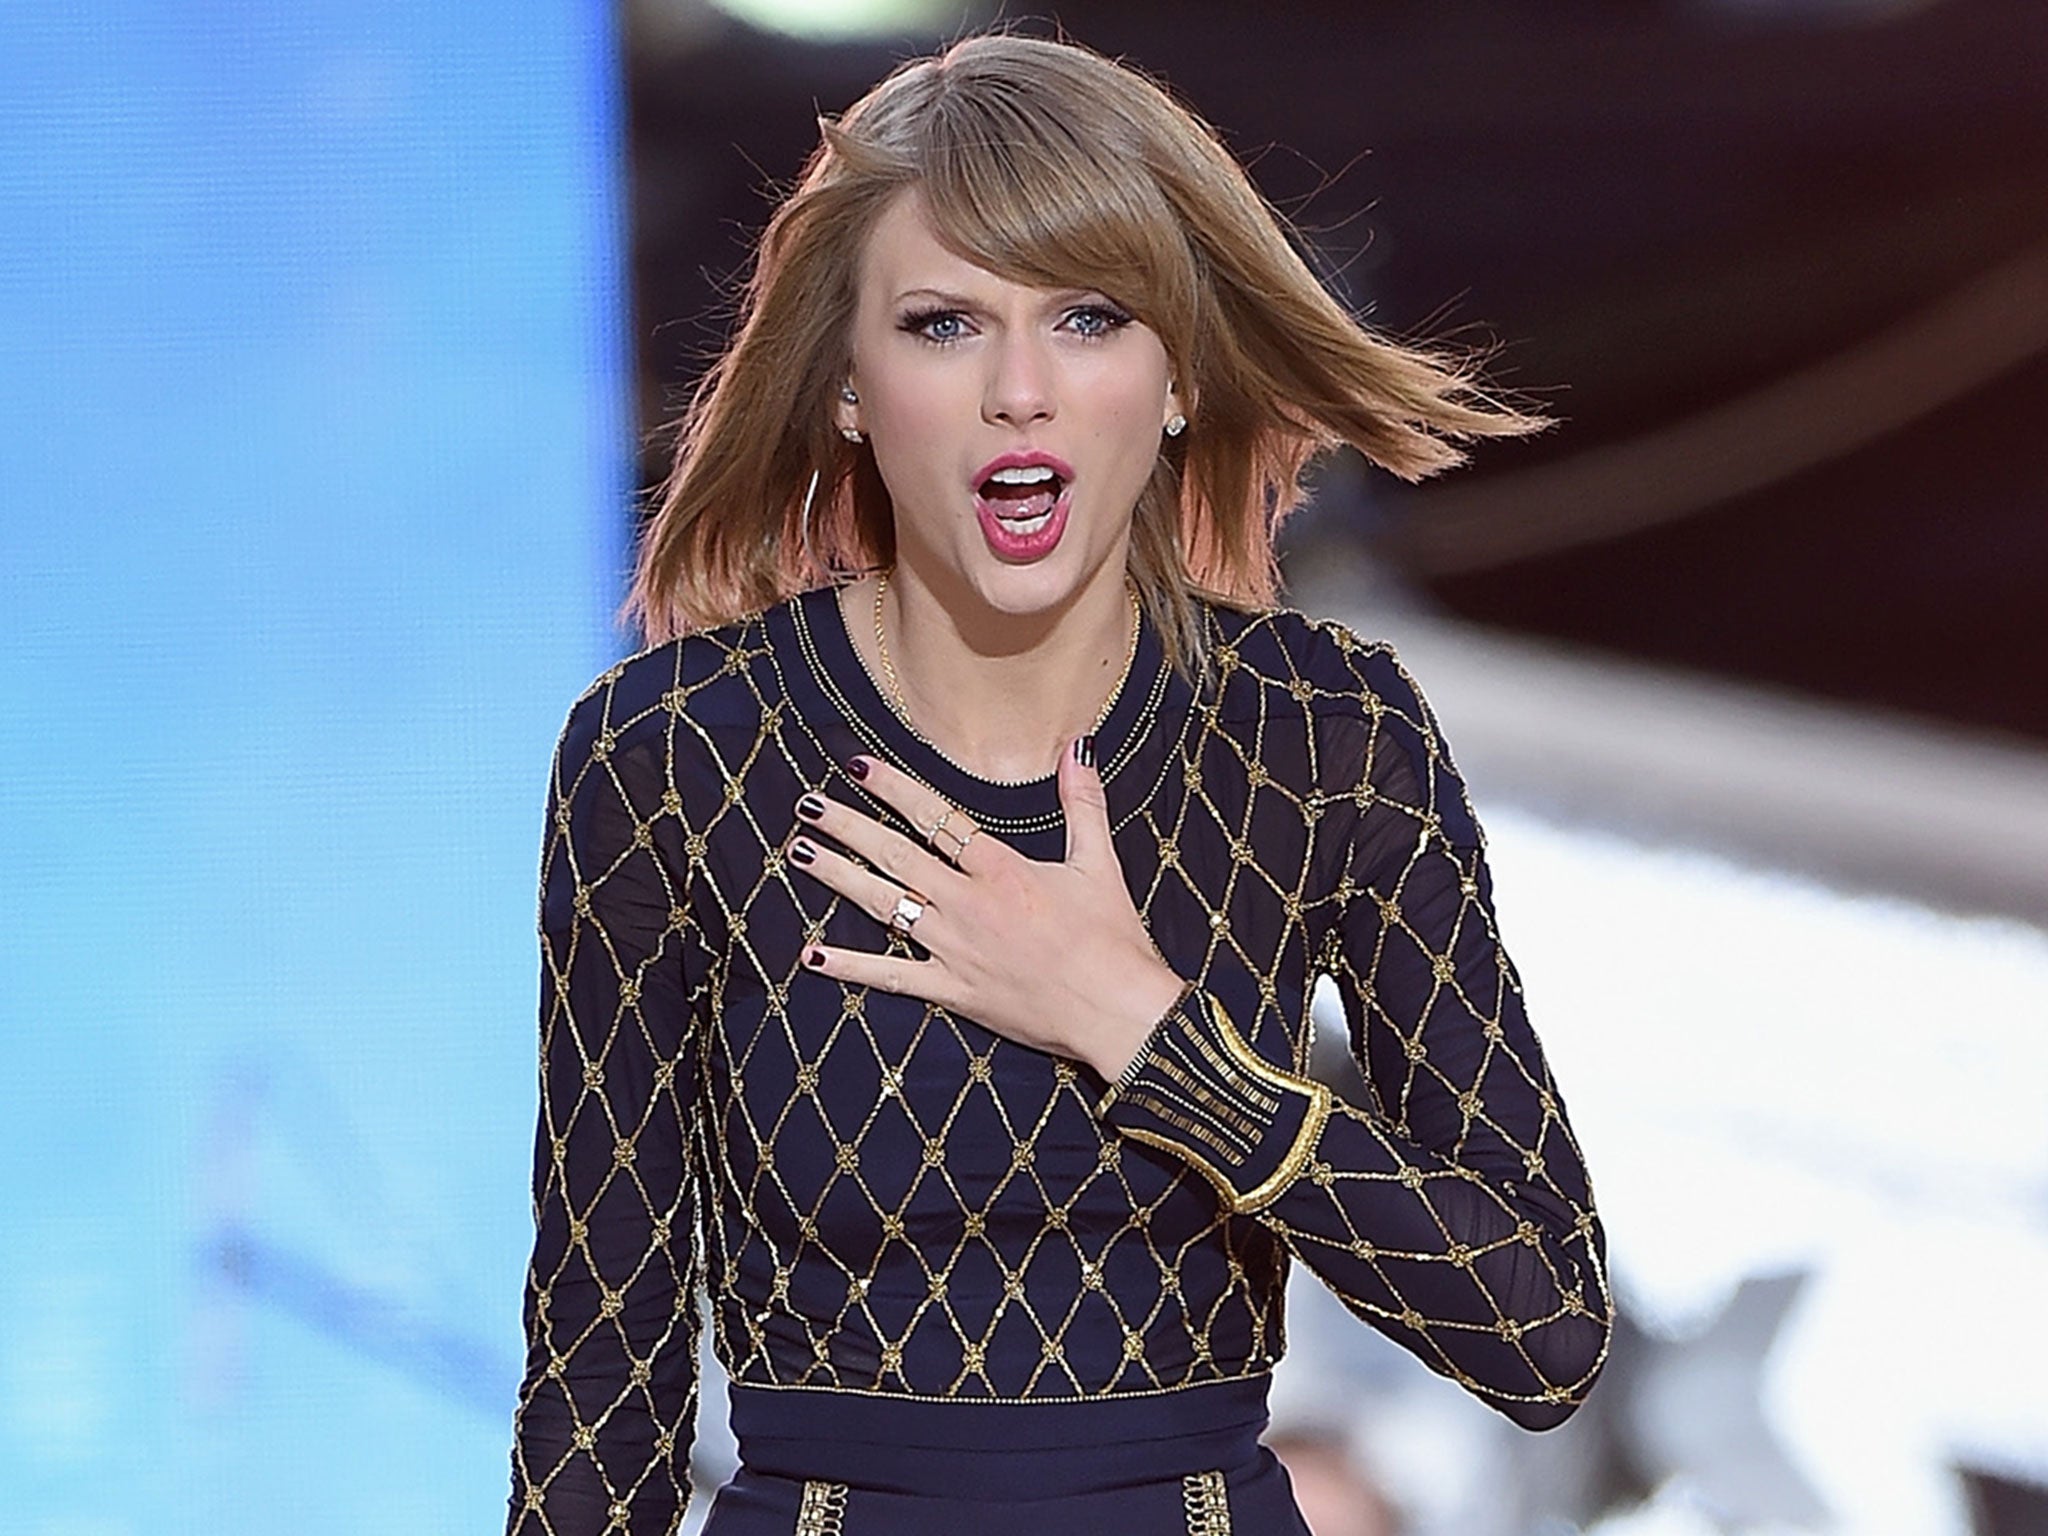 There'll be no singing along to Taylor Swift, though